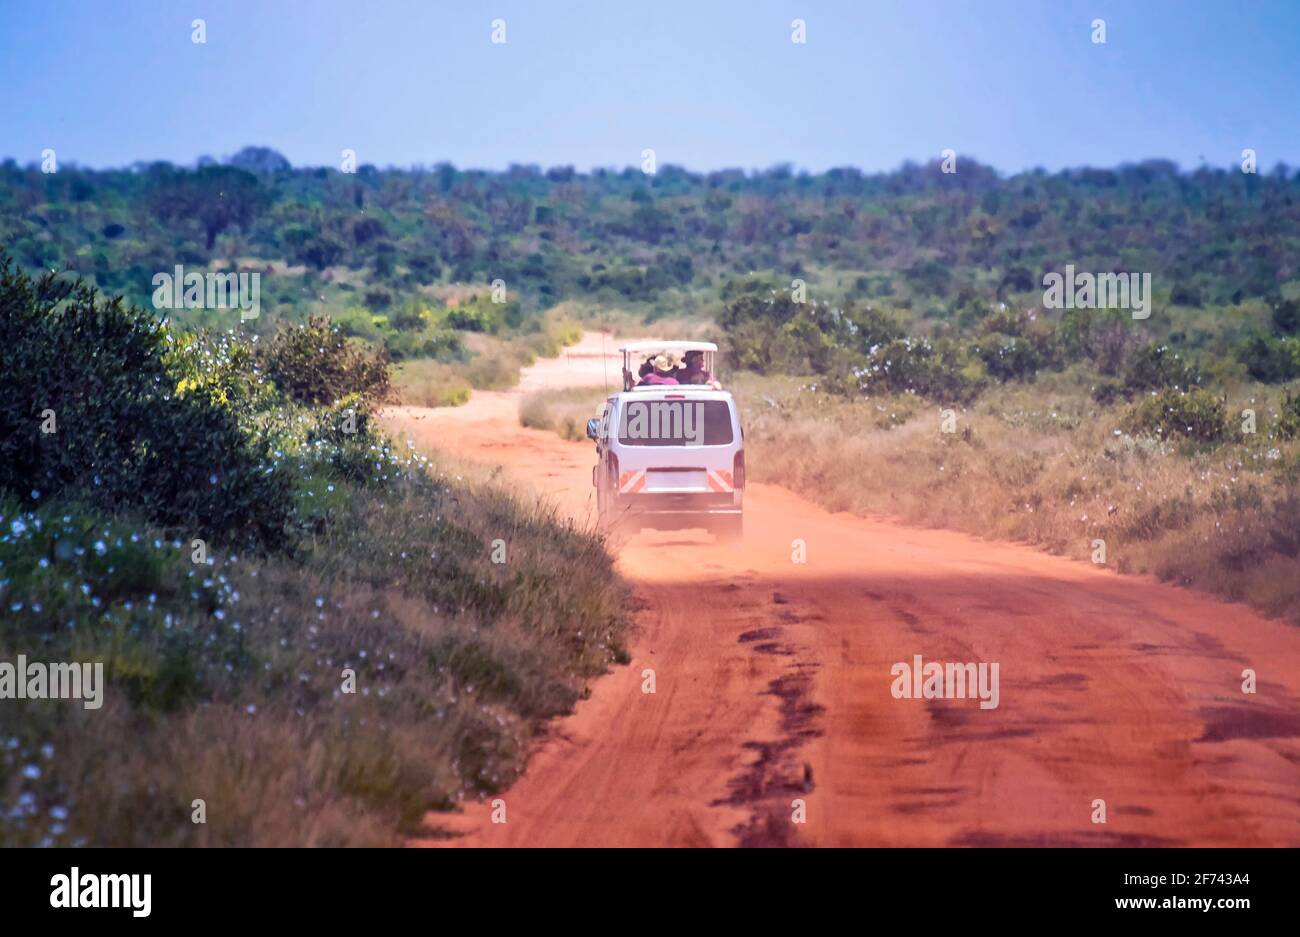 A safari car goes on a dirt road in the Tsavo East African National Park, Kenya. In the car are tourists who have come for animals and adventure. It's Stock Photo